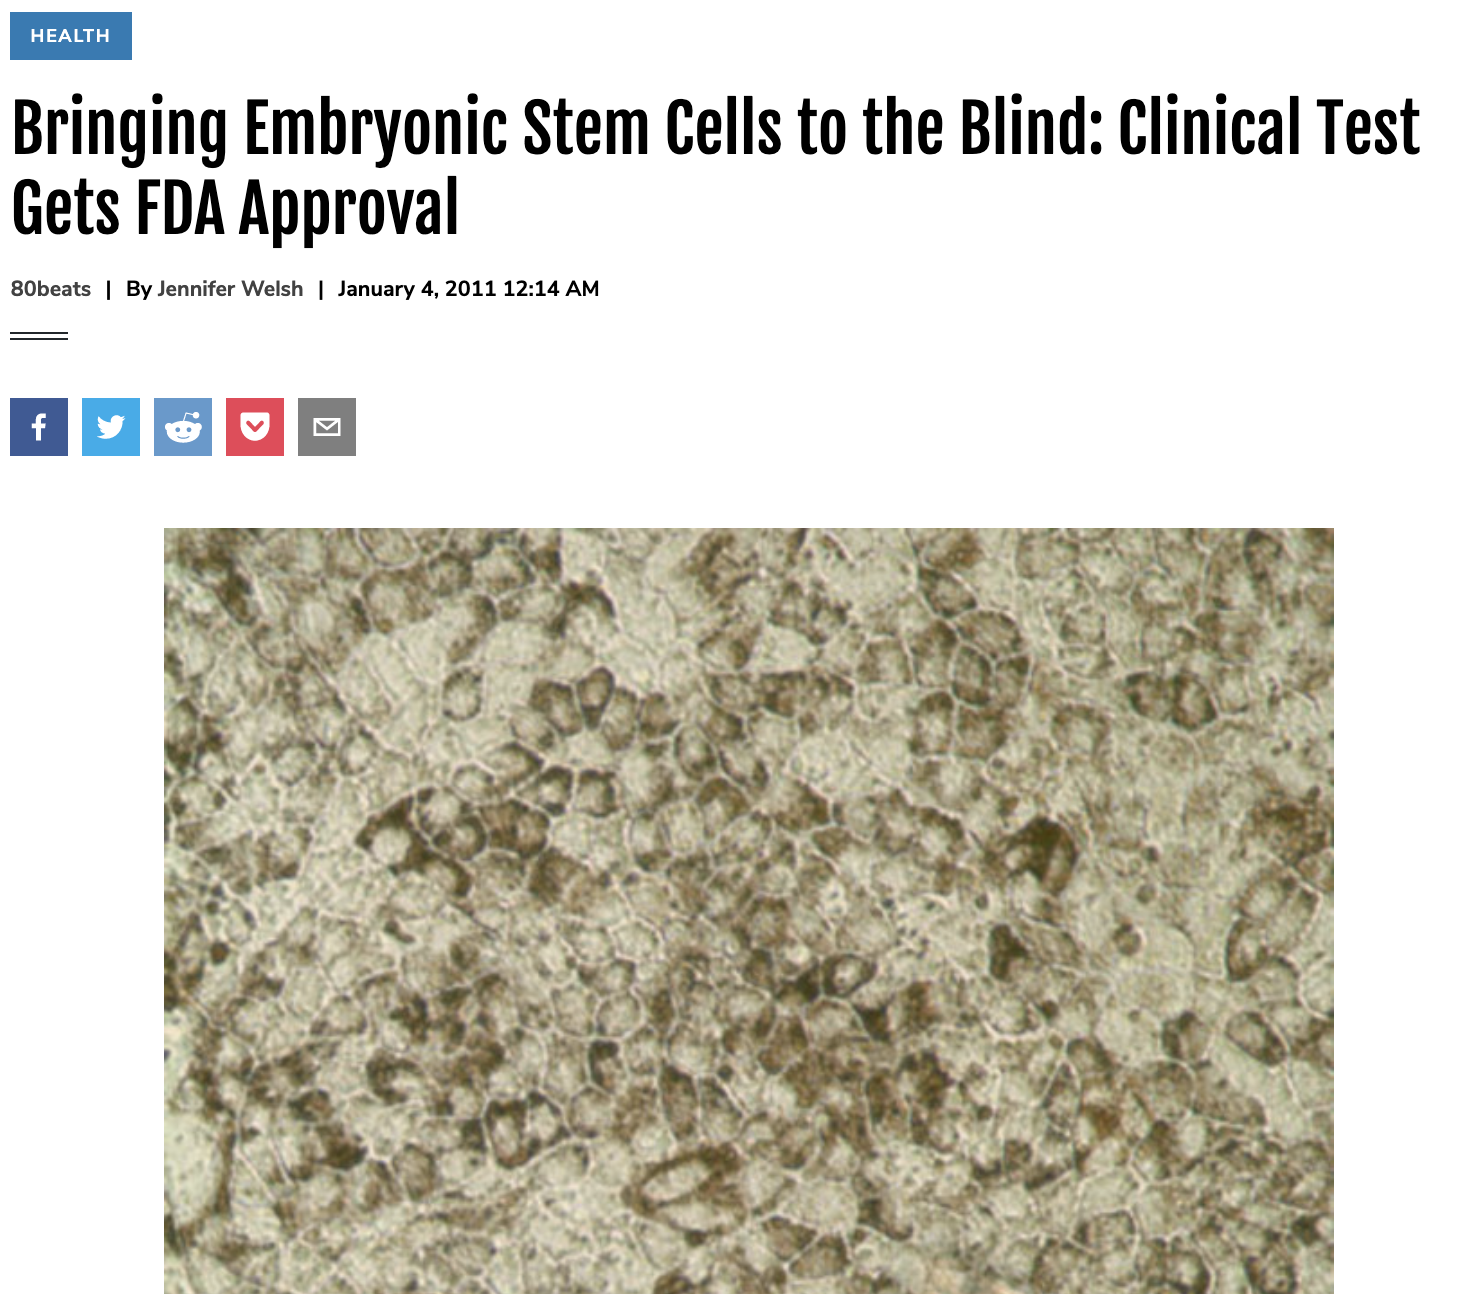 Bringing Embryonic Stem Cells to the Blind: Clinical Test Gets FDA Approval